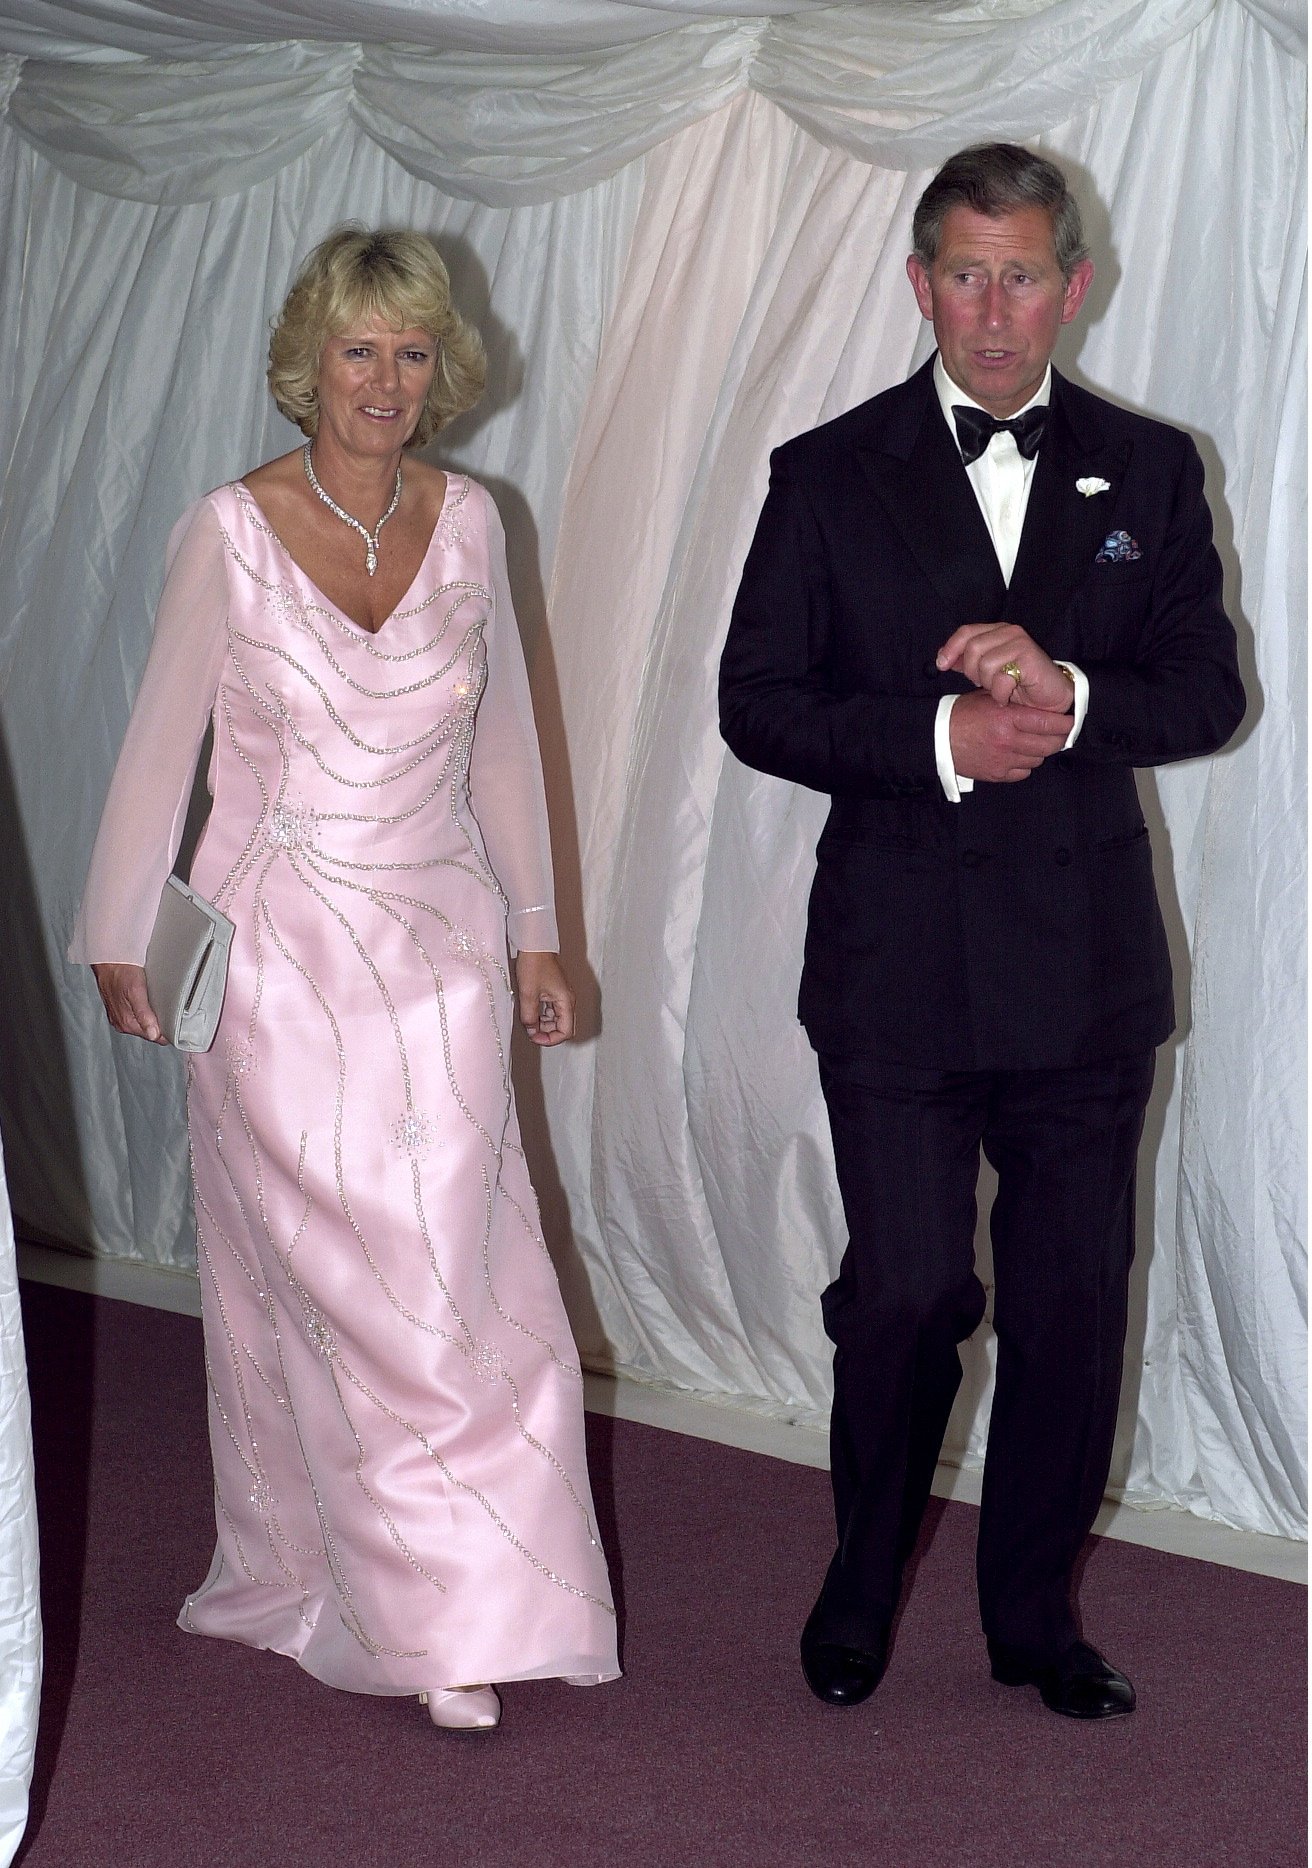 King Charles and Queen Consort Camilla Parker-Bowles during The Prince's Foundation Gala Dinner in London. | Source: Getty Images